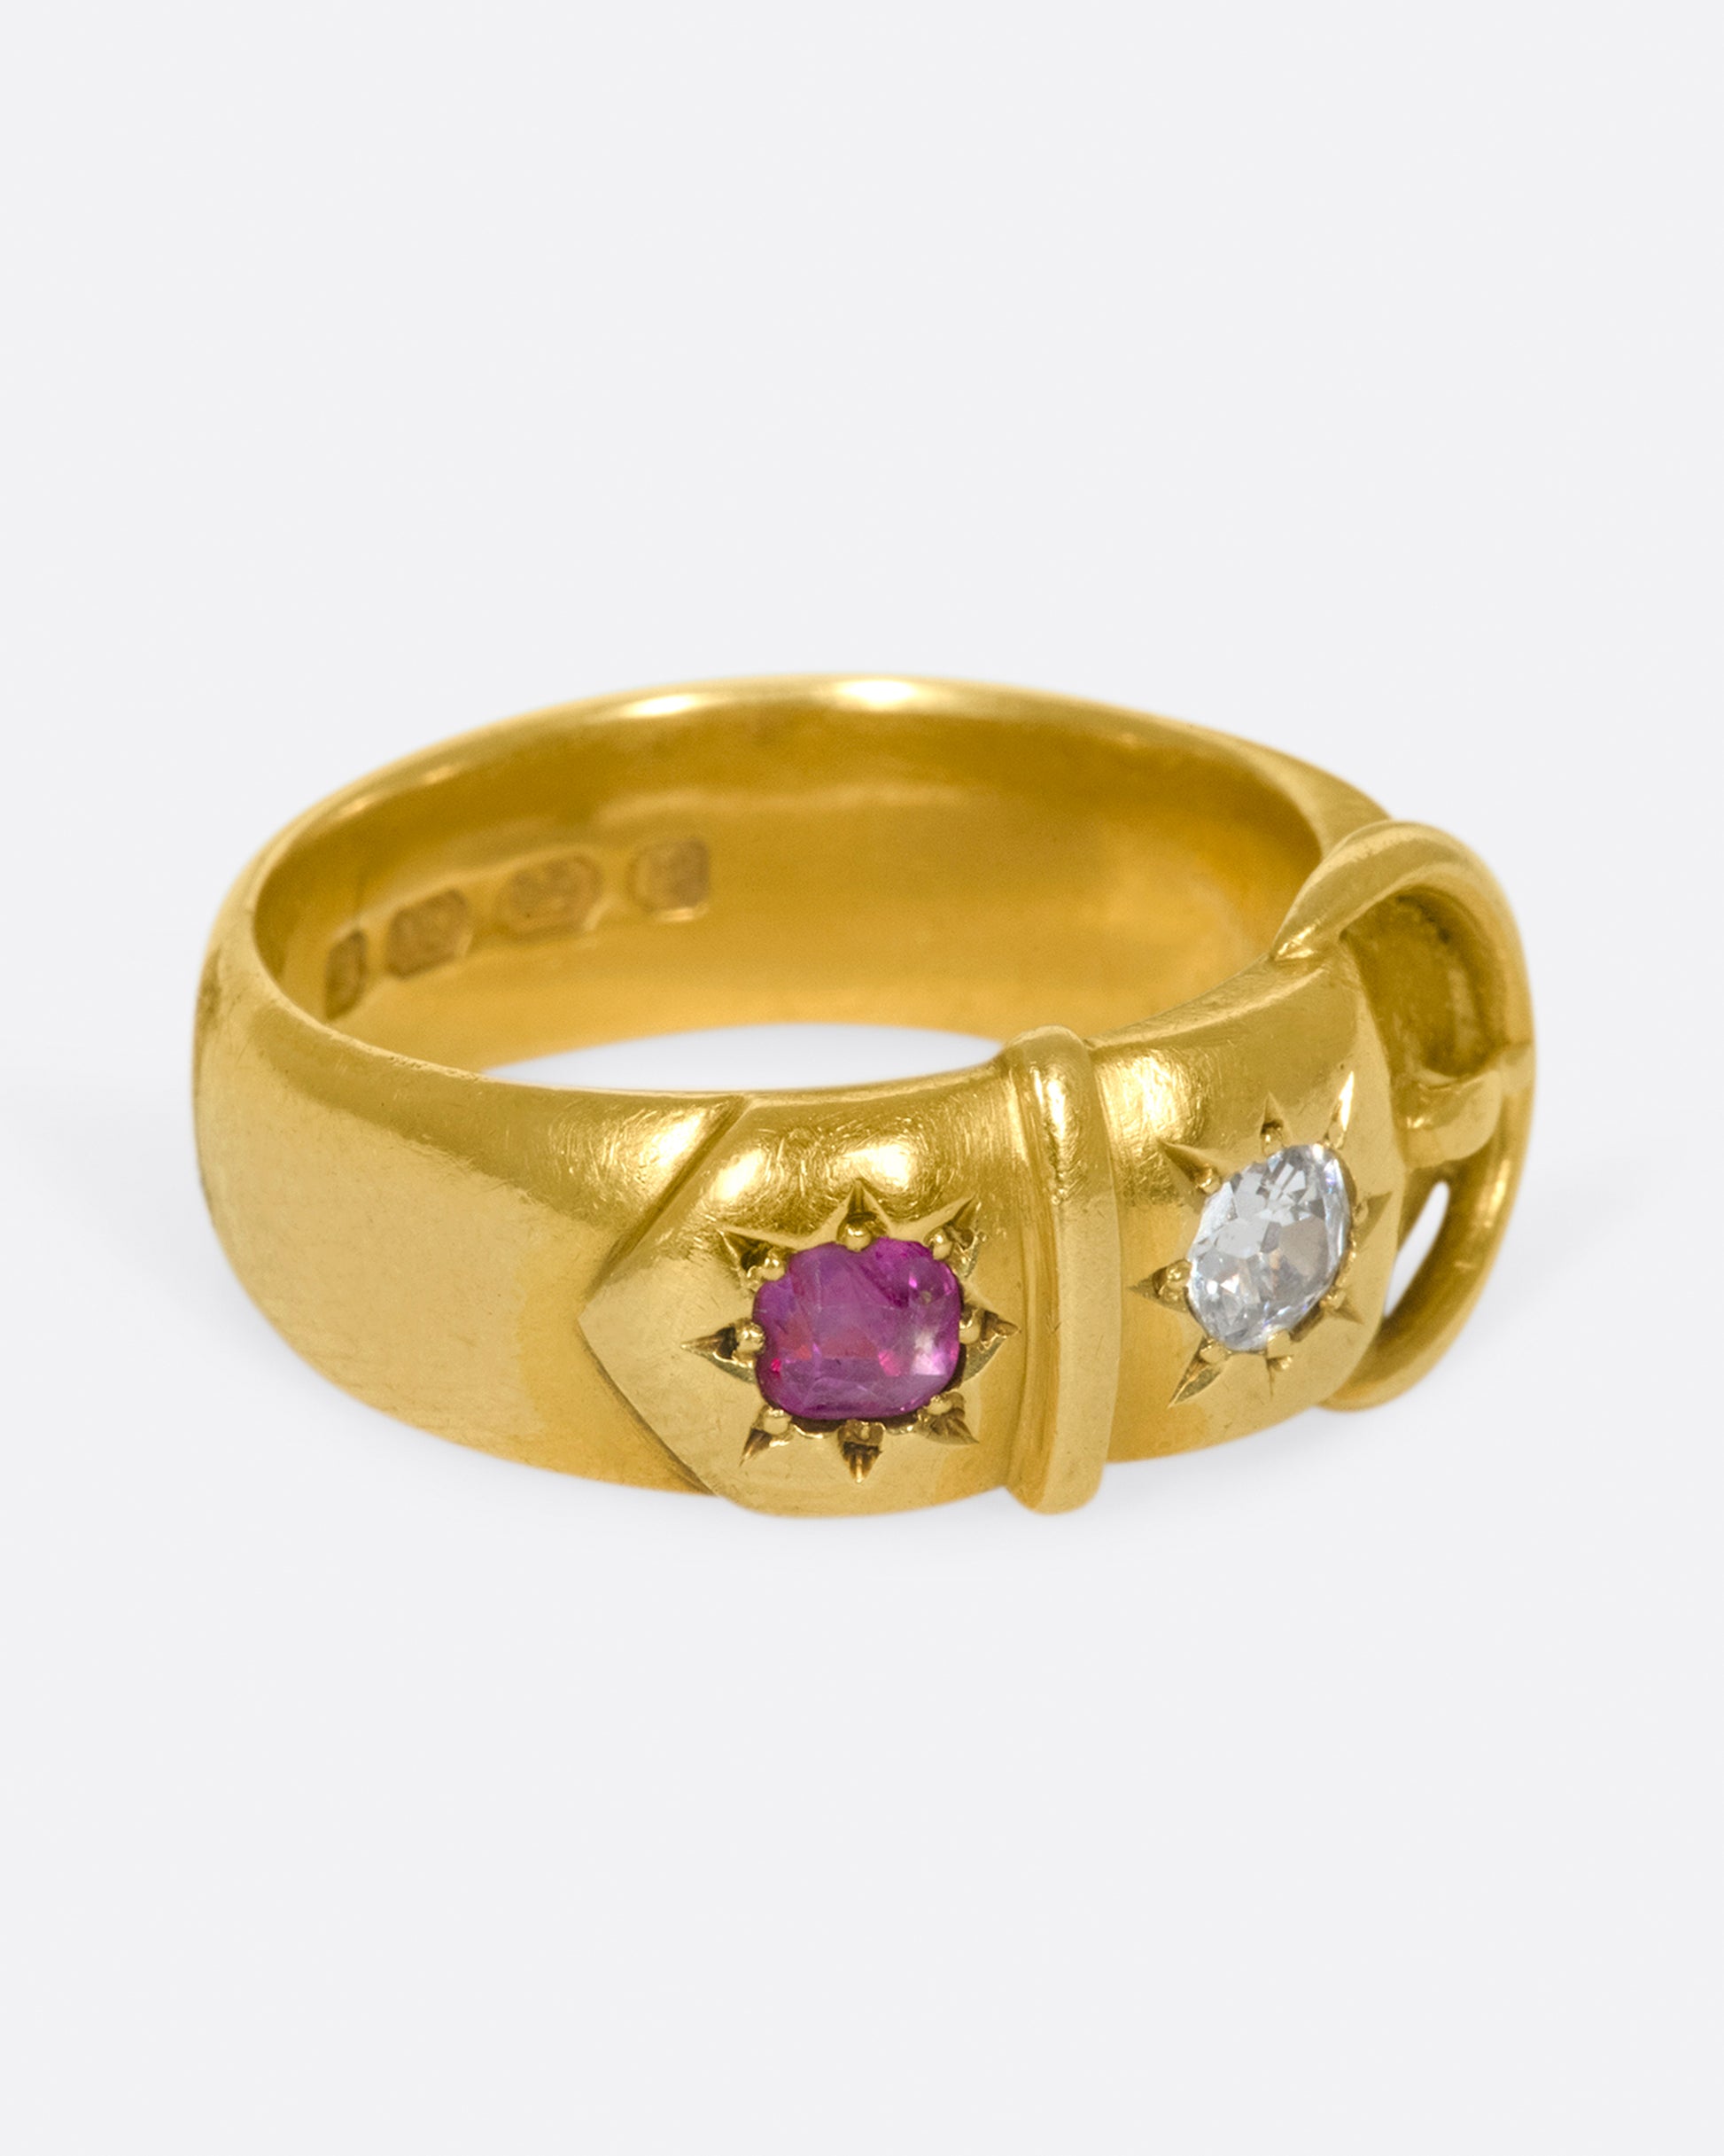 Dating back 1891 in Birmingham, England, this buckle ring is buttery soft with vibrant stones.